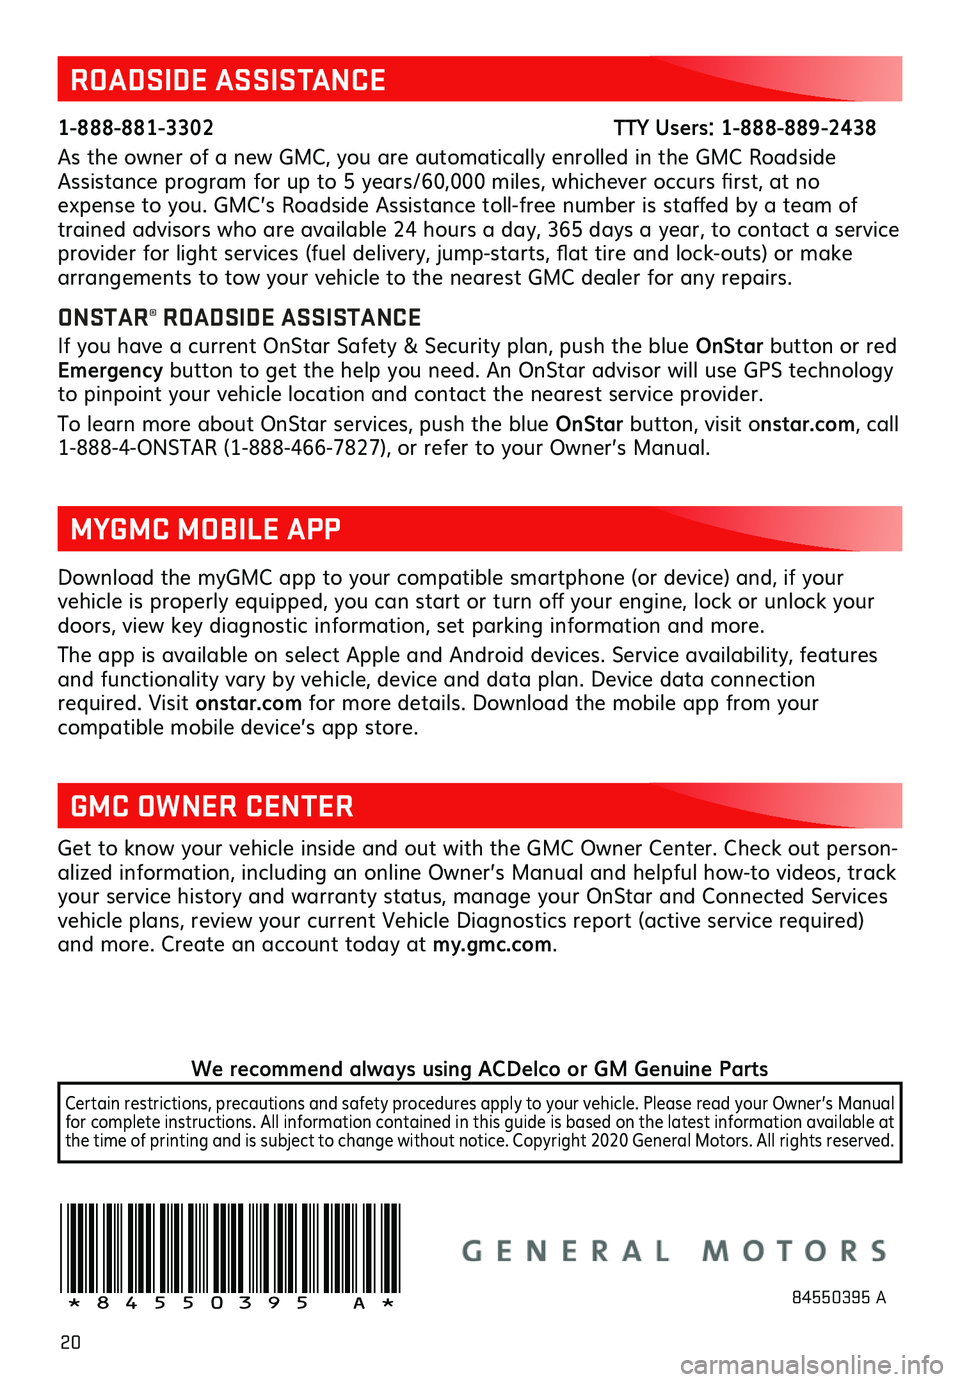 GMC SIERRA 2021  Get To Know Guide 20
Download the myGMC app to your compatible smartphone (or device) and, if your  vehicle is properly equipped, you can start or turn off your engine, lock or unlock your doors, view key diagnostic in